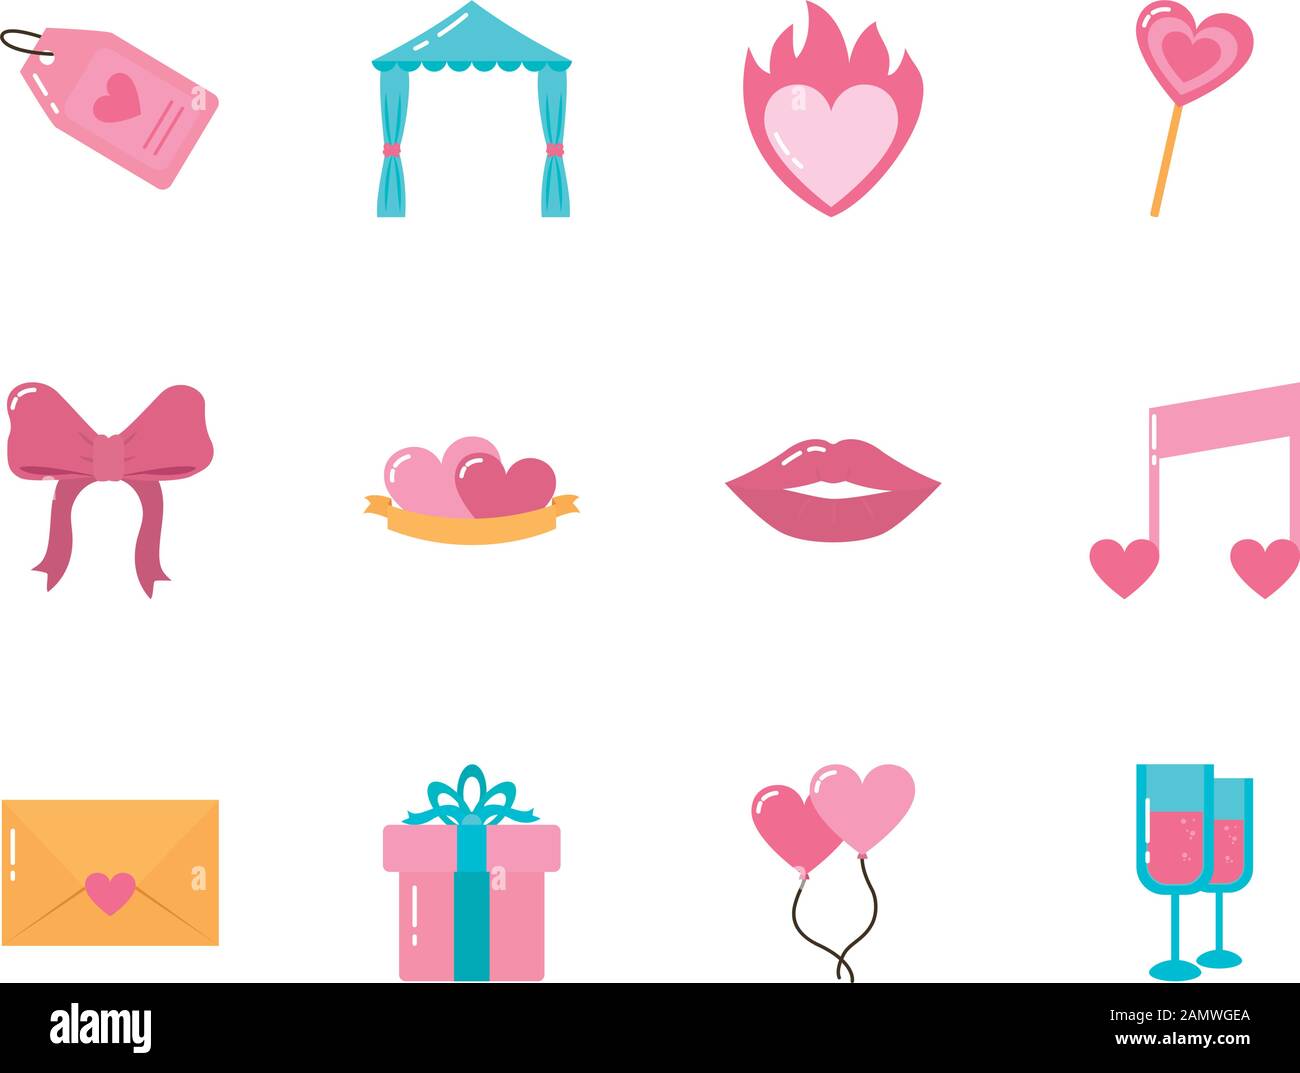 Love and valentines day icon set vector design Stock Vector